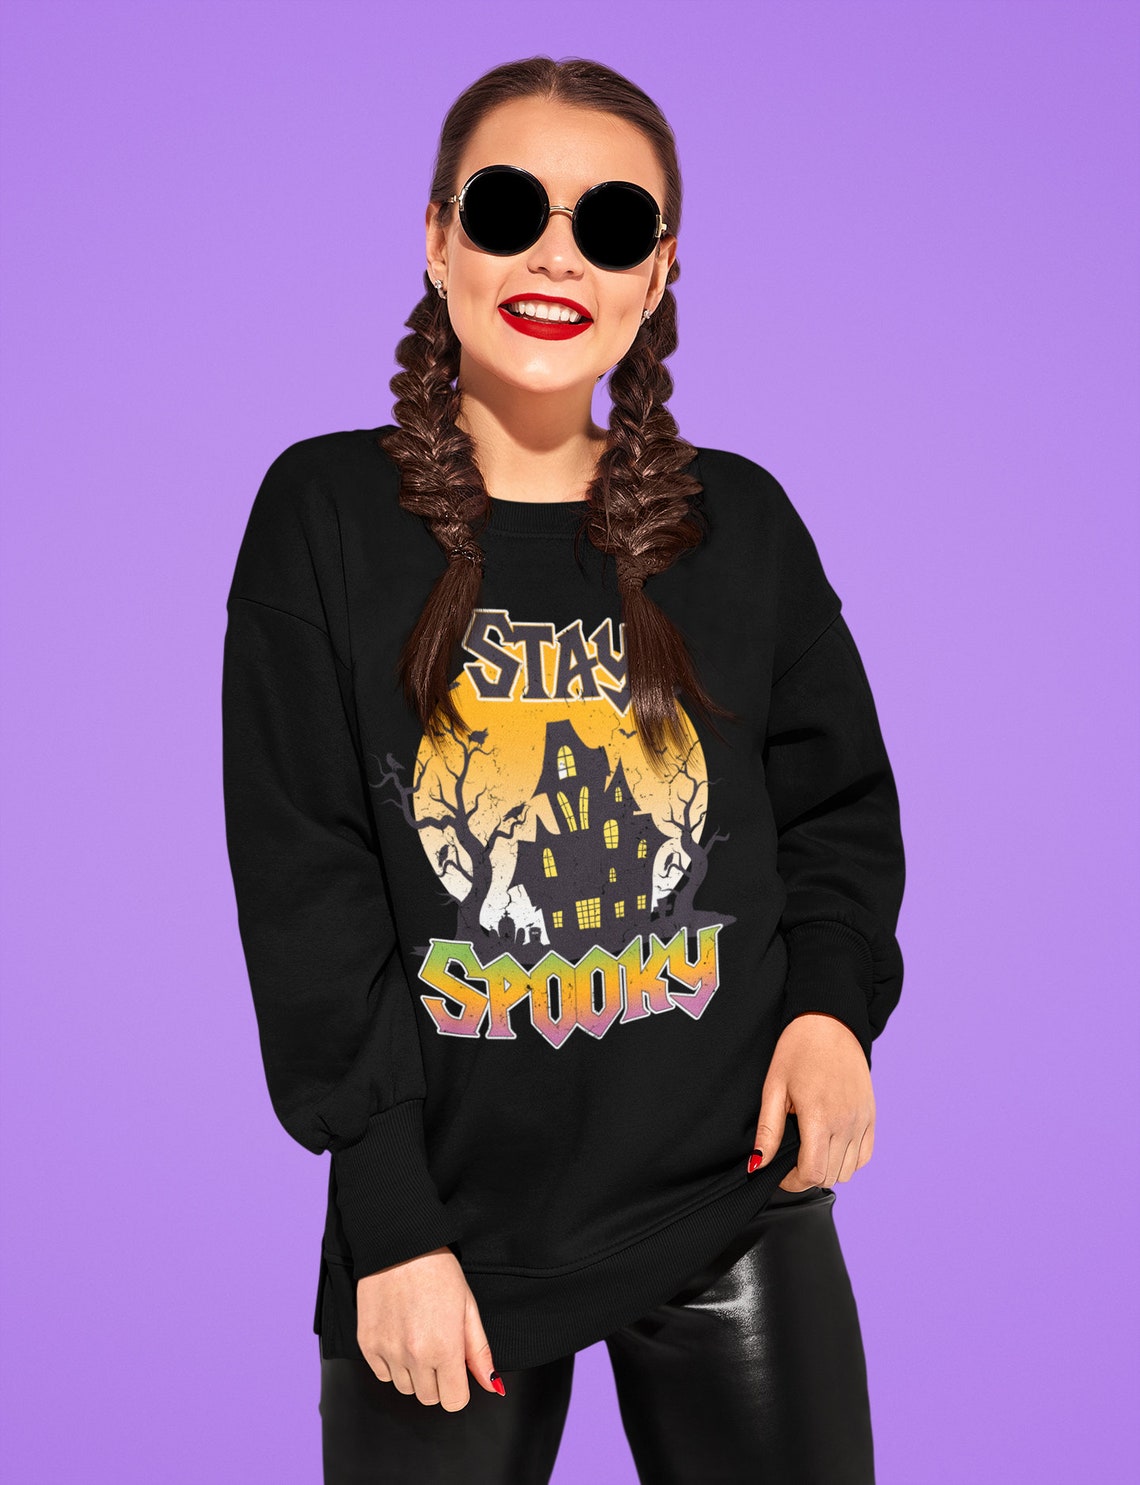 Stay Spooky Halloween Sweatshirt/ Halloween Fall Sweater/ Toddler, Youth and Adult Sizes Available